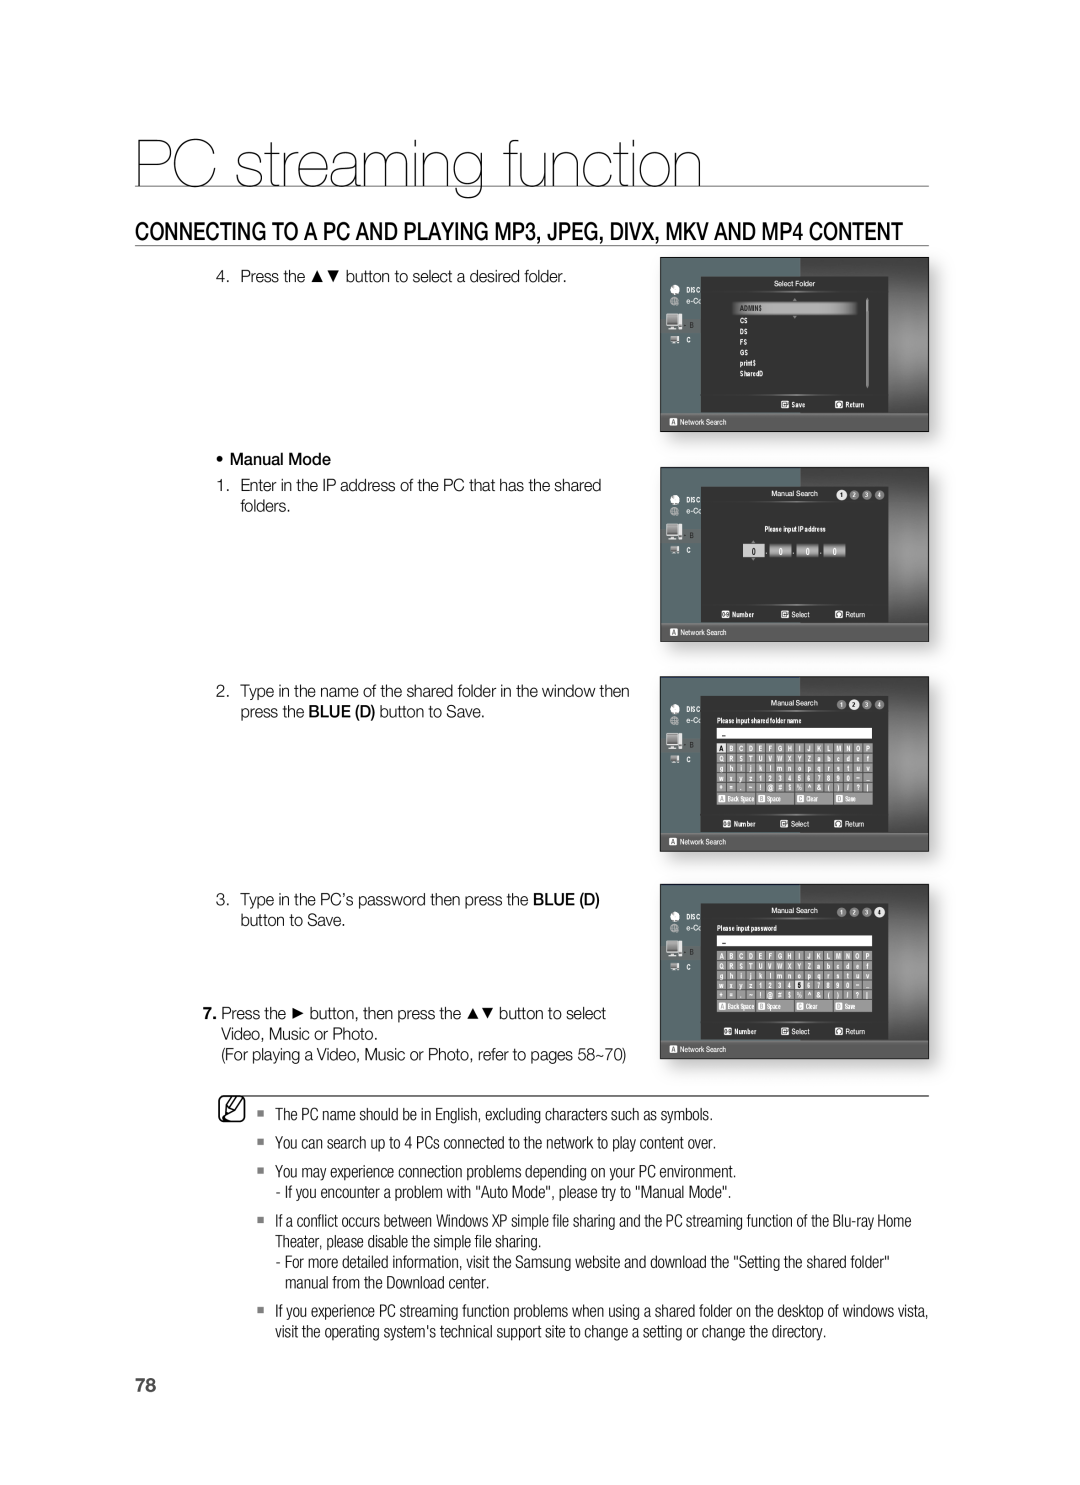 Samsung HT-BD8200 user manual PC streaming function, Press the button to select a desired folder 